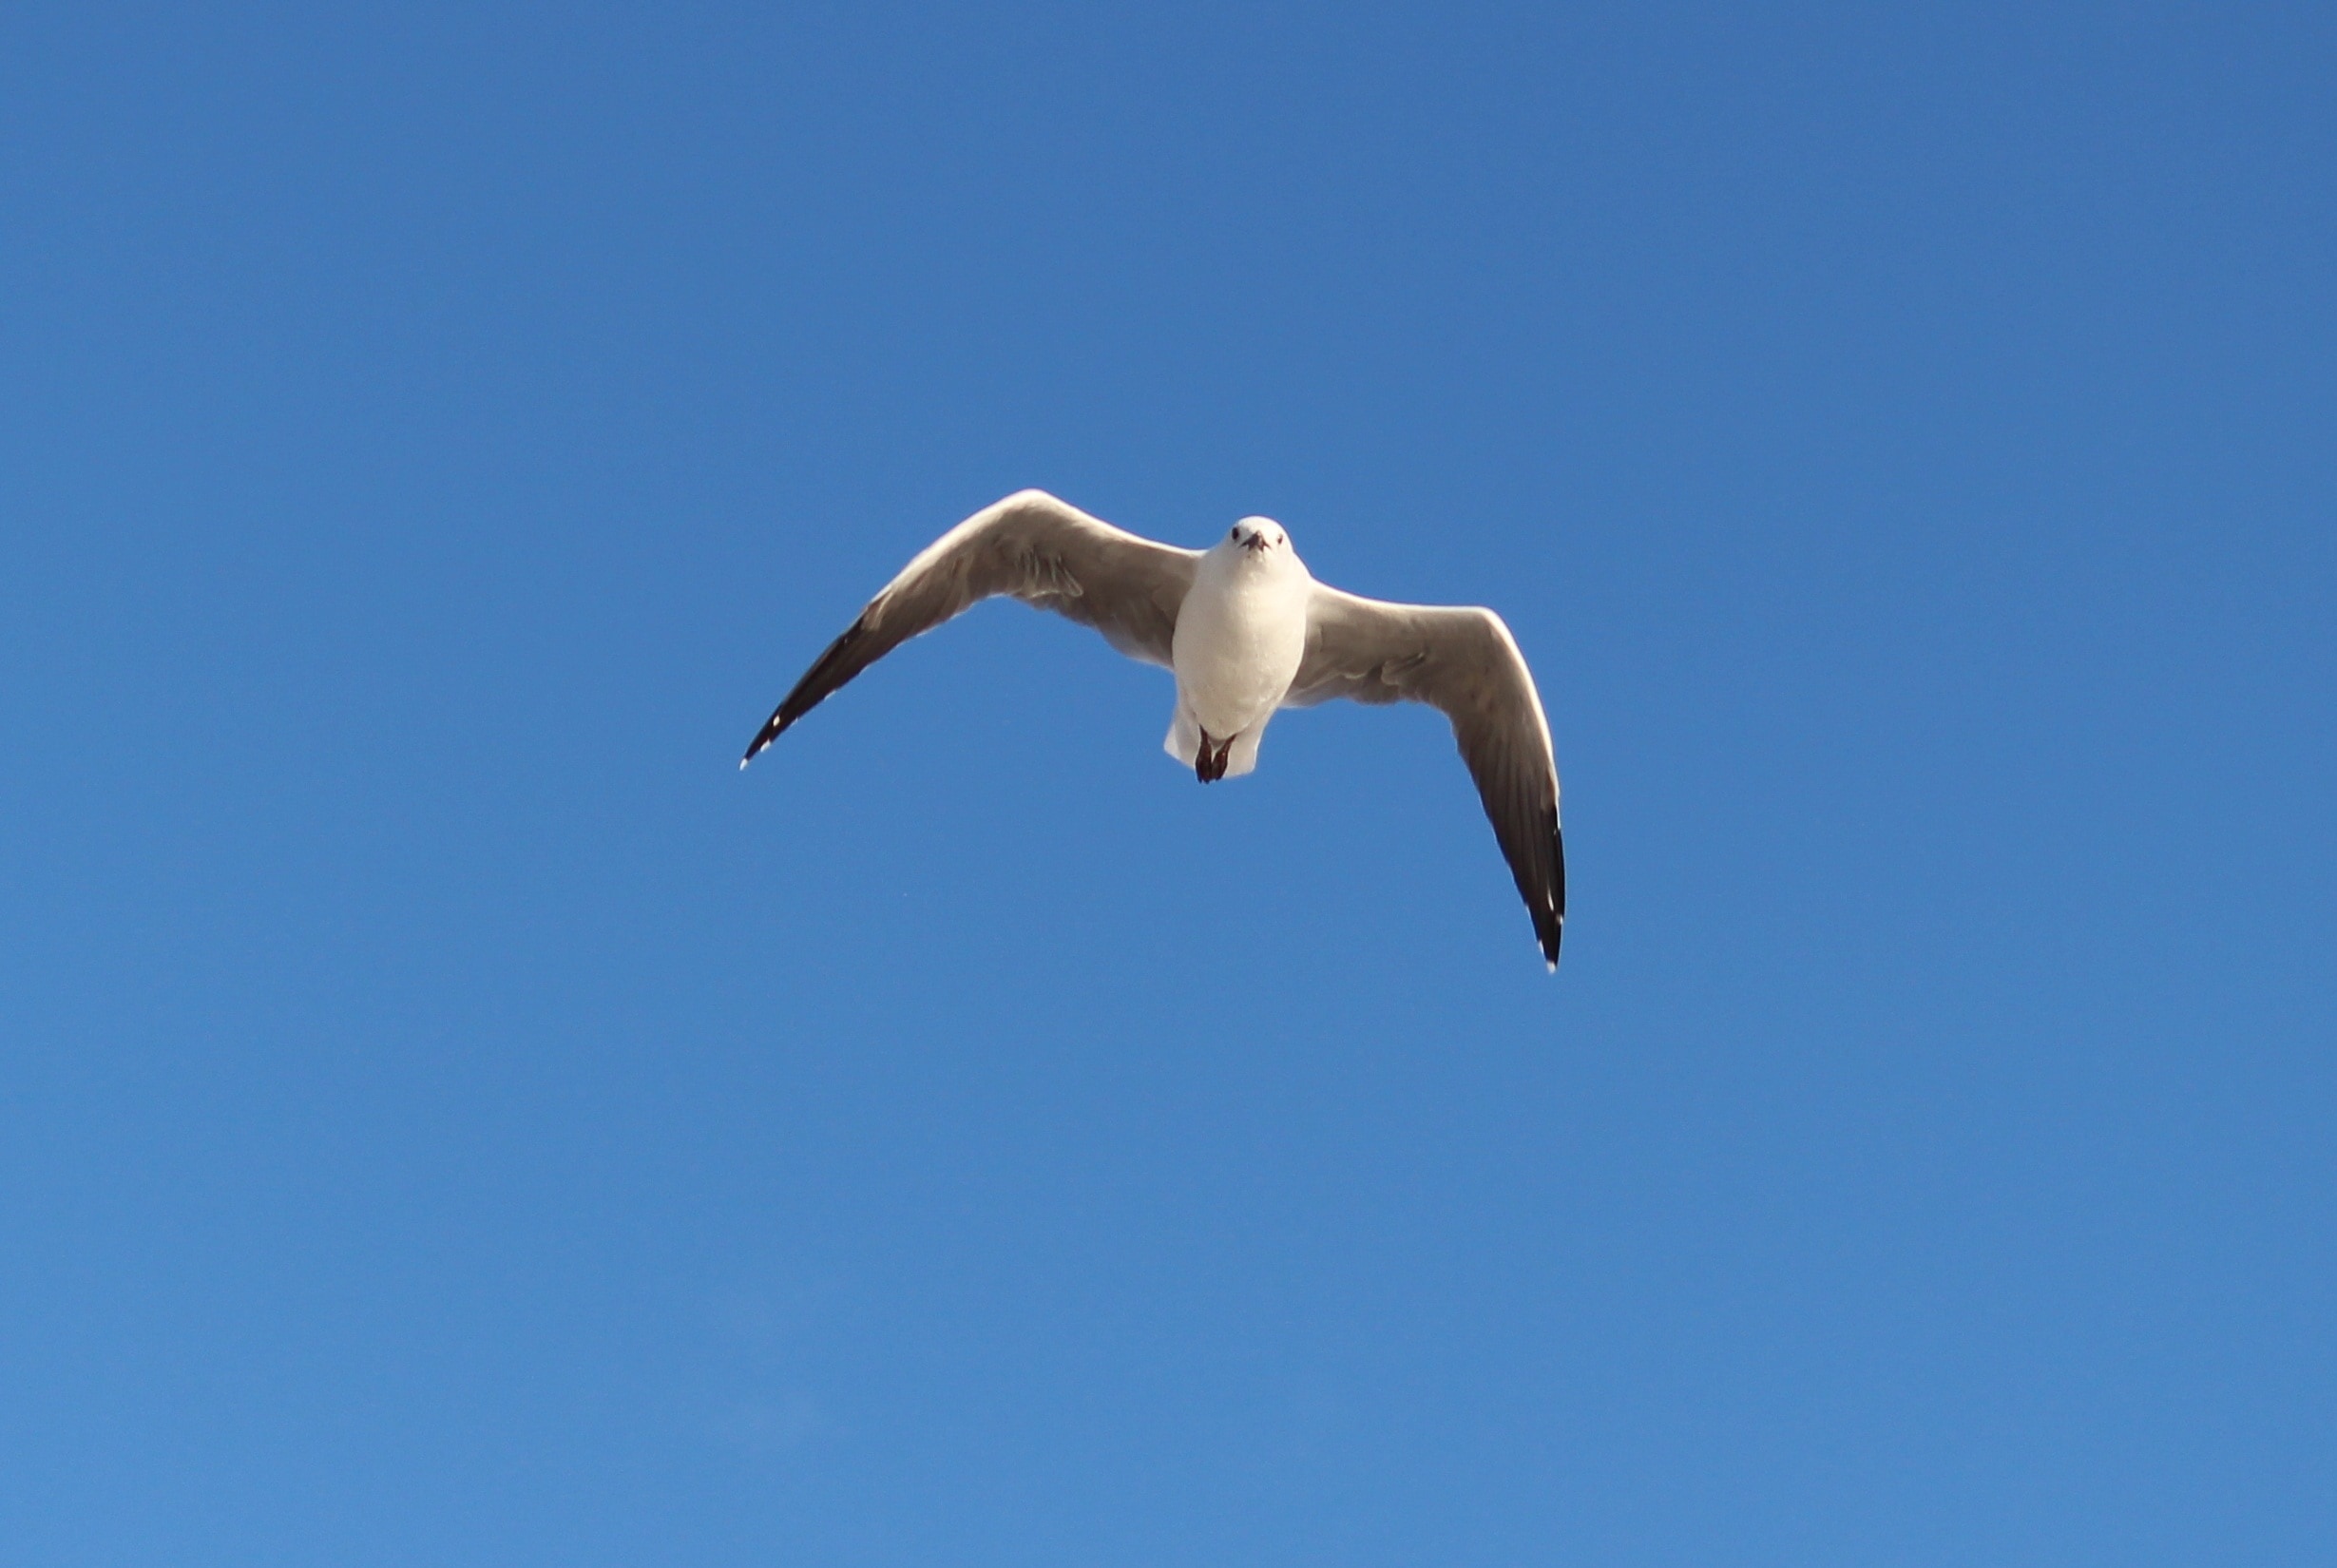 white and grey seagull